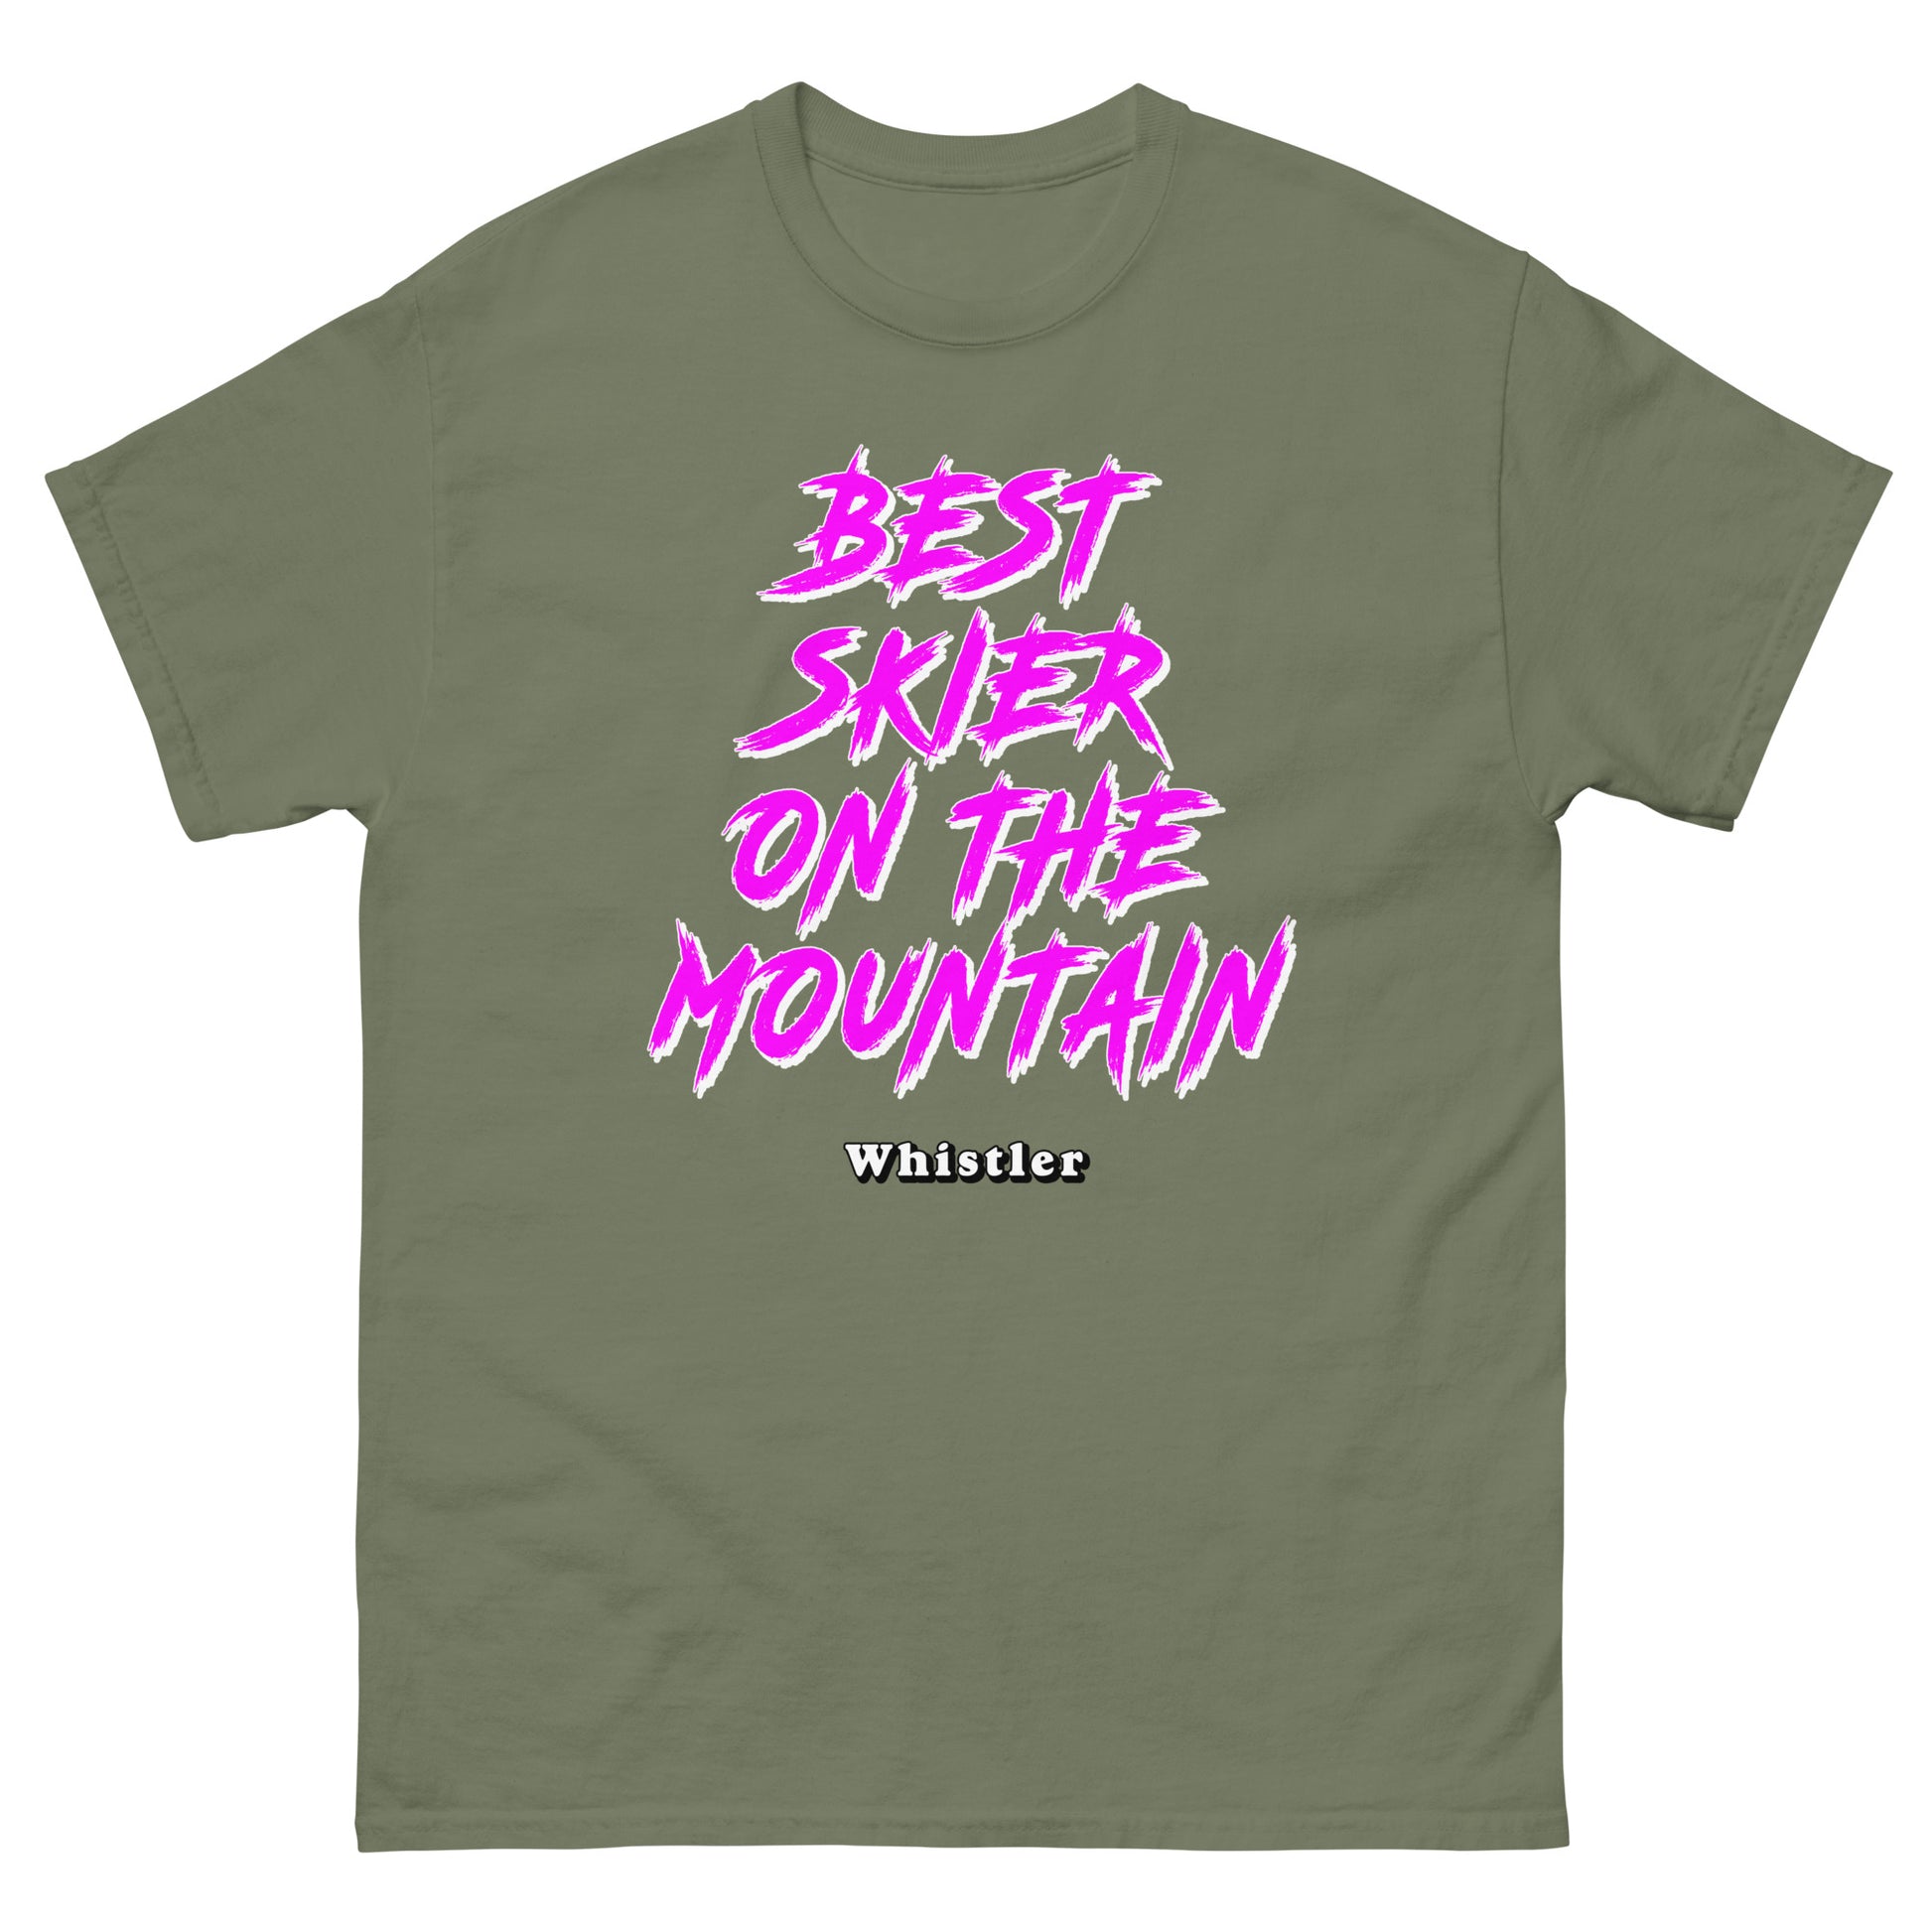 Best Skiier on the mountain whistler design printed on a t-shirt by Whistler Shirts